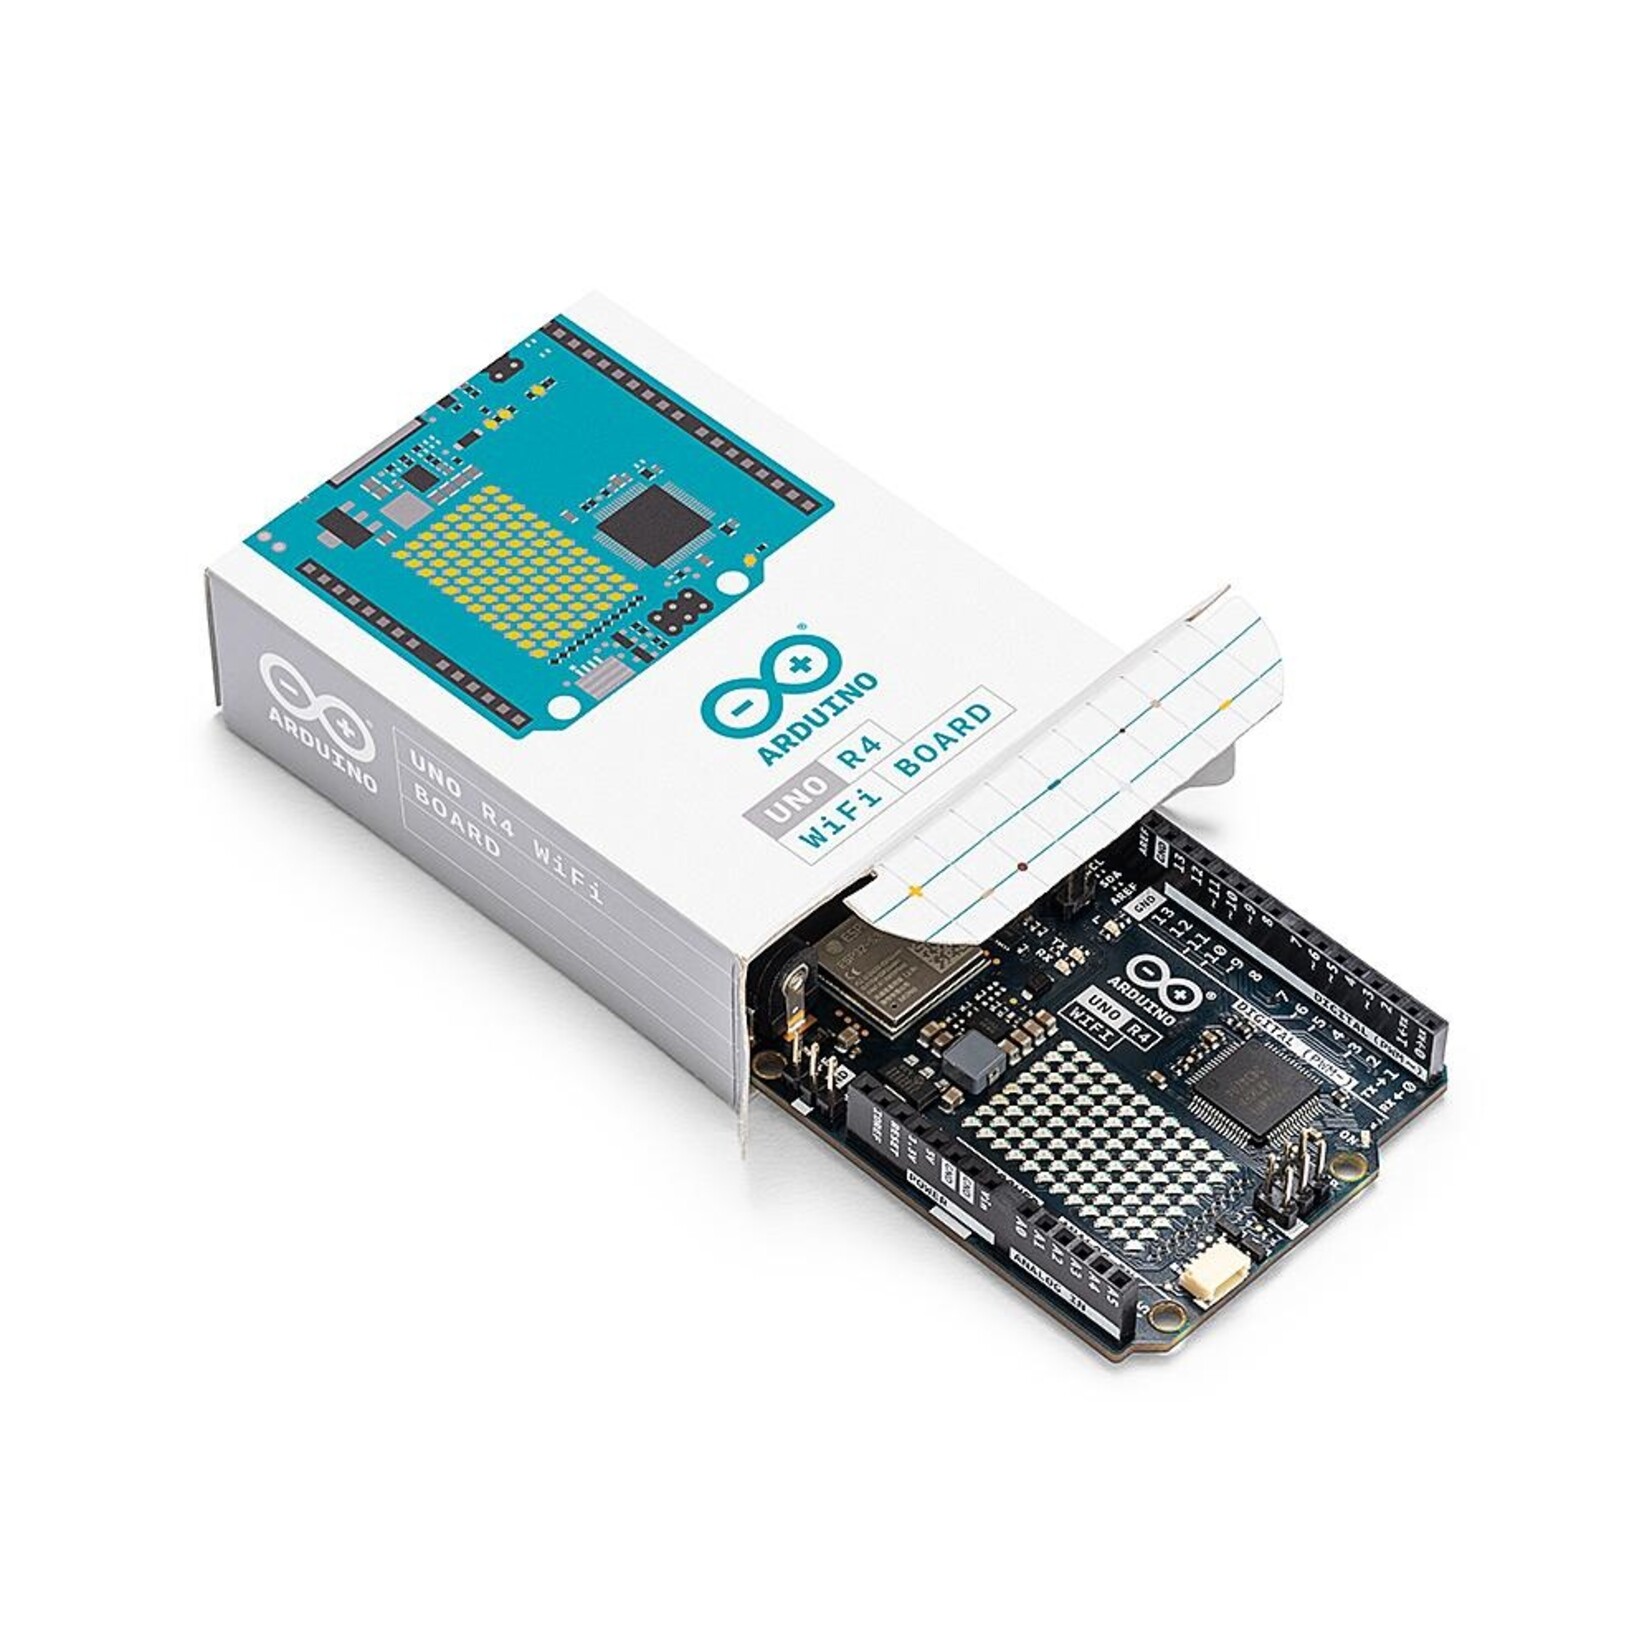 How to use the Arduino UNO R4 WIFI board step by step